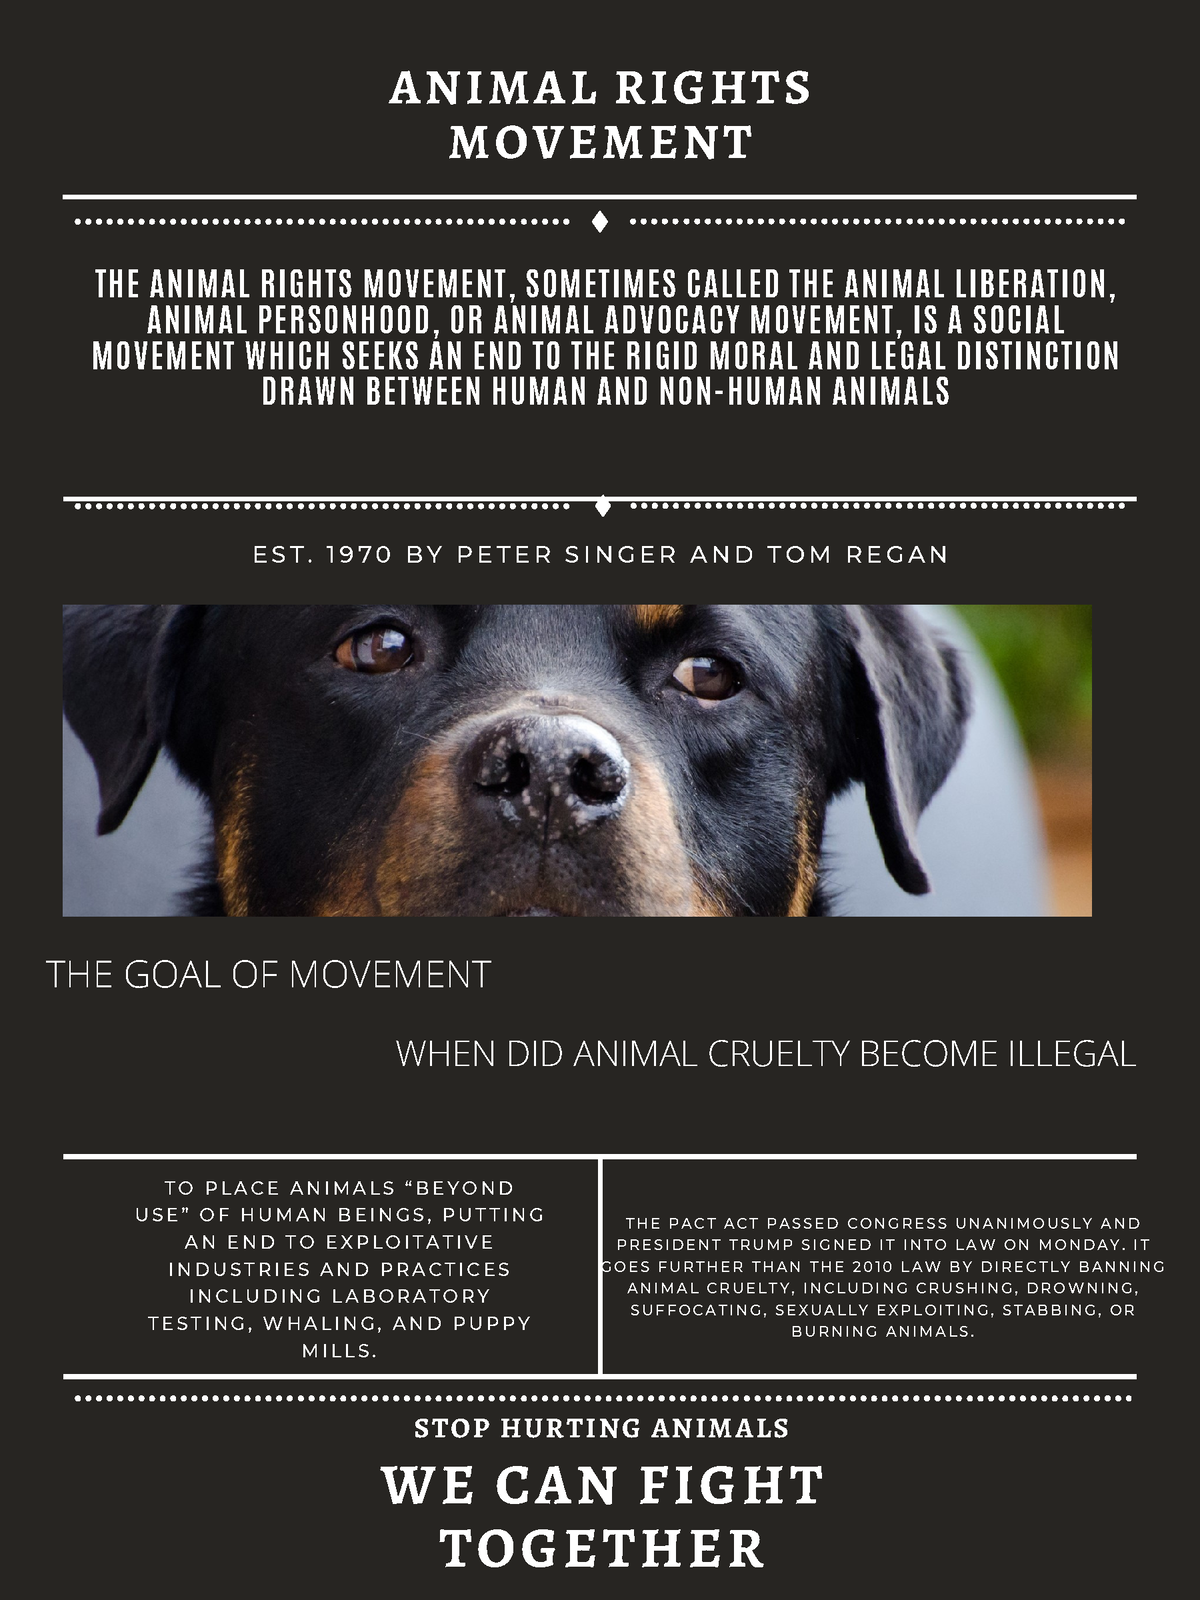 Animal rights - notes - ####### THE ANIMAL RIGHTS MOVEMENT, SOMETIMES  CALLED THE ANIMAL LIBERATION, - Studocu